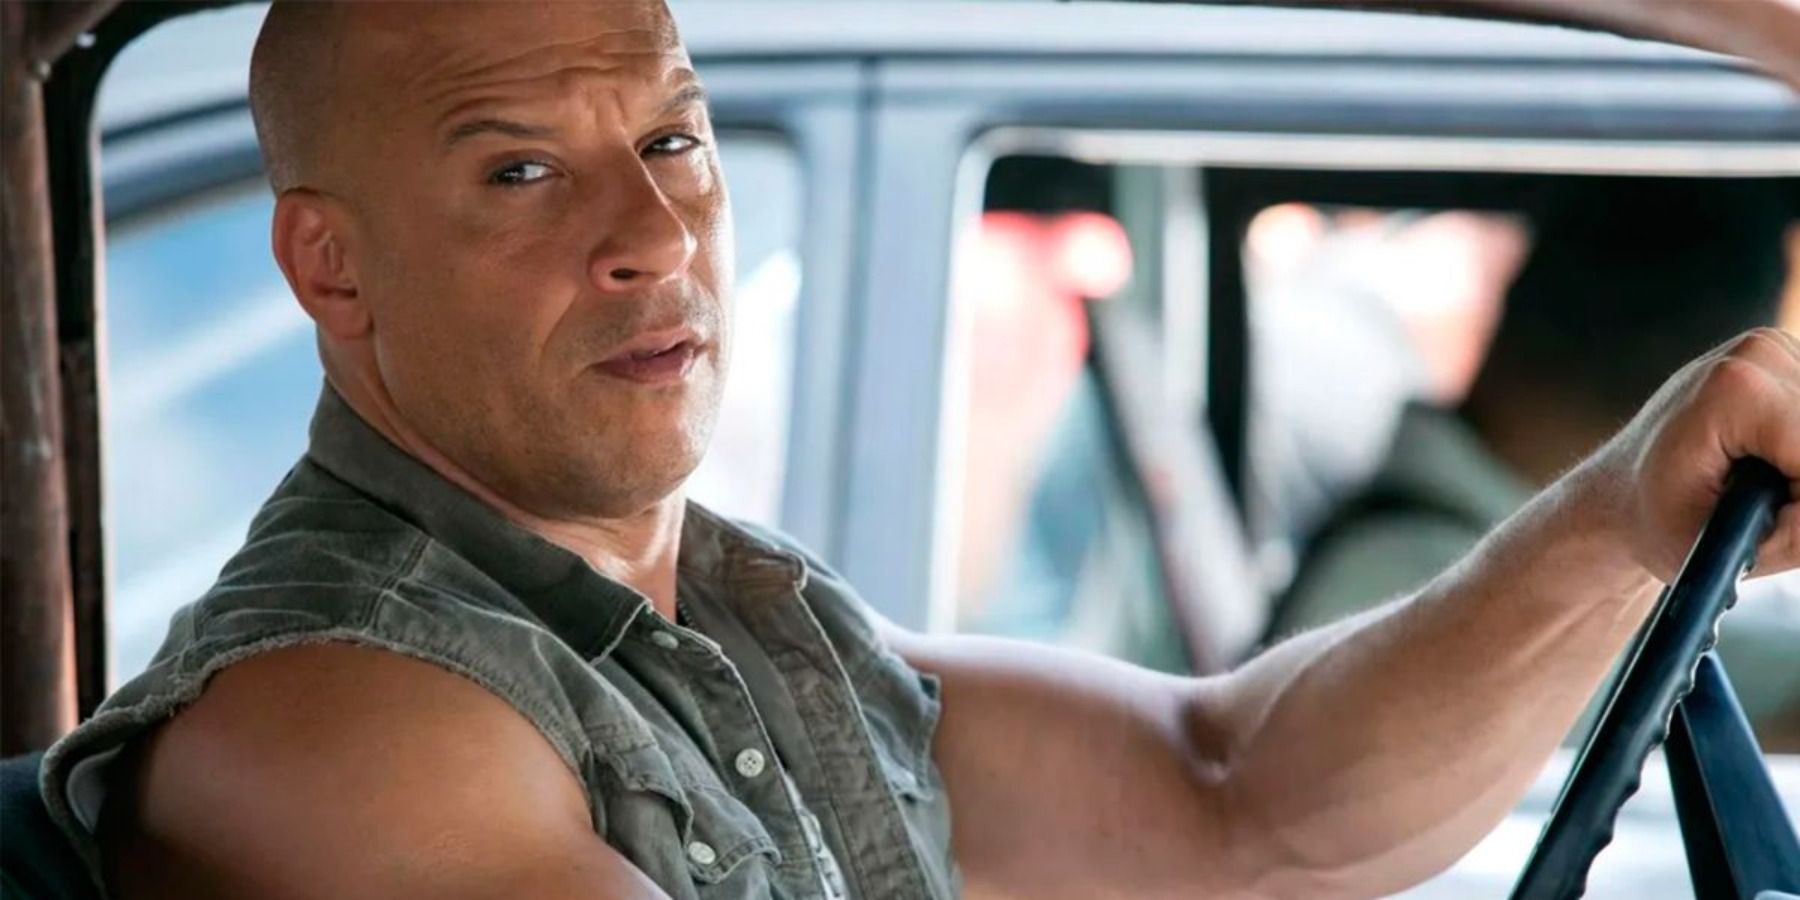 Vin Diesel as Dominic Toretto driving car in Fast and Furious